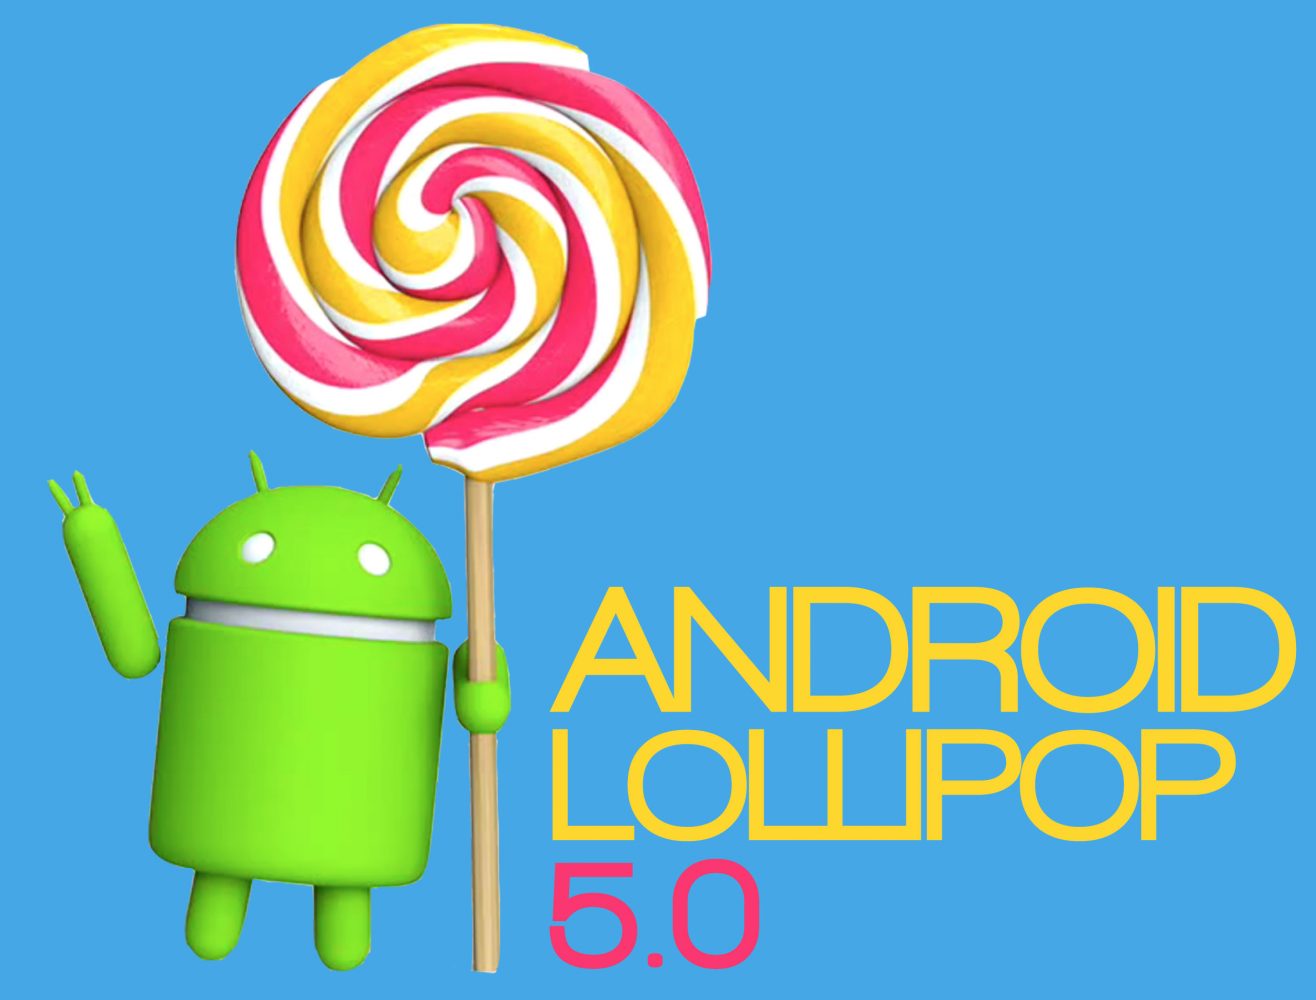 Google introduces Android Lollipop 5.0